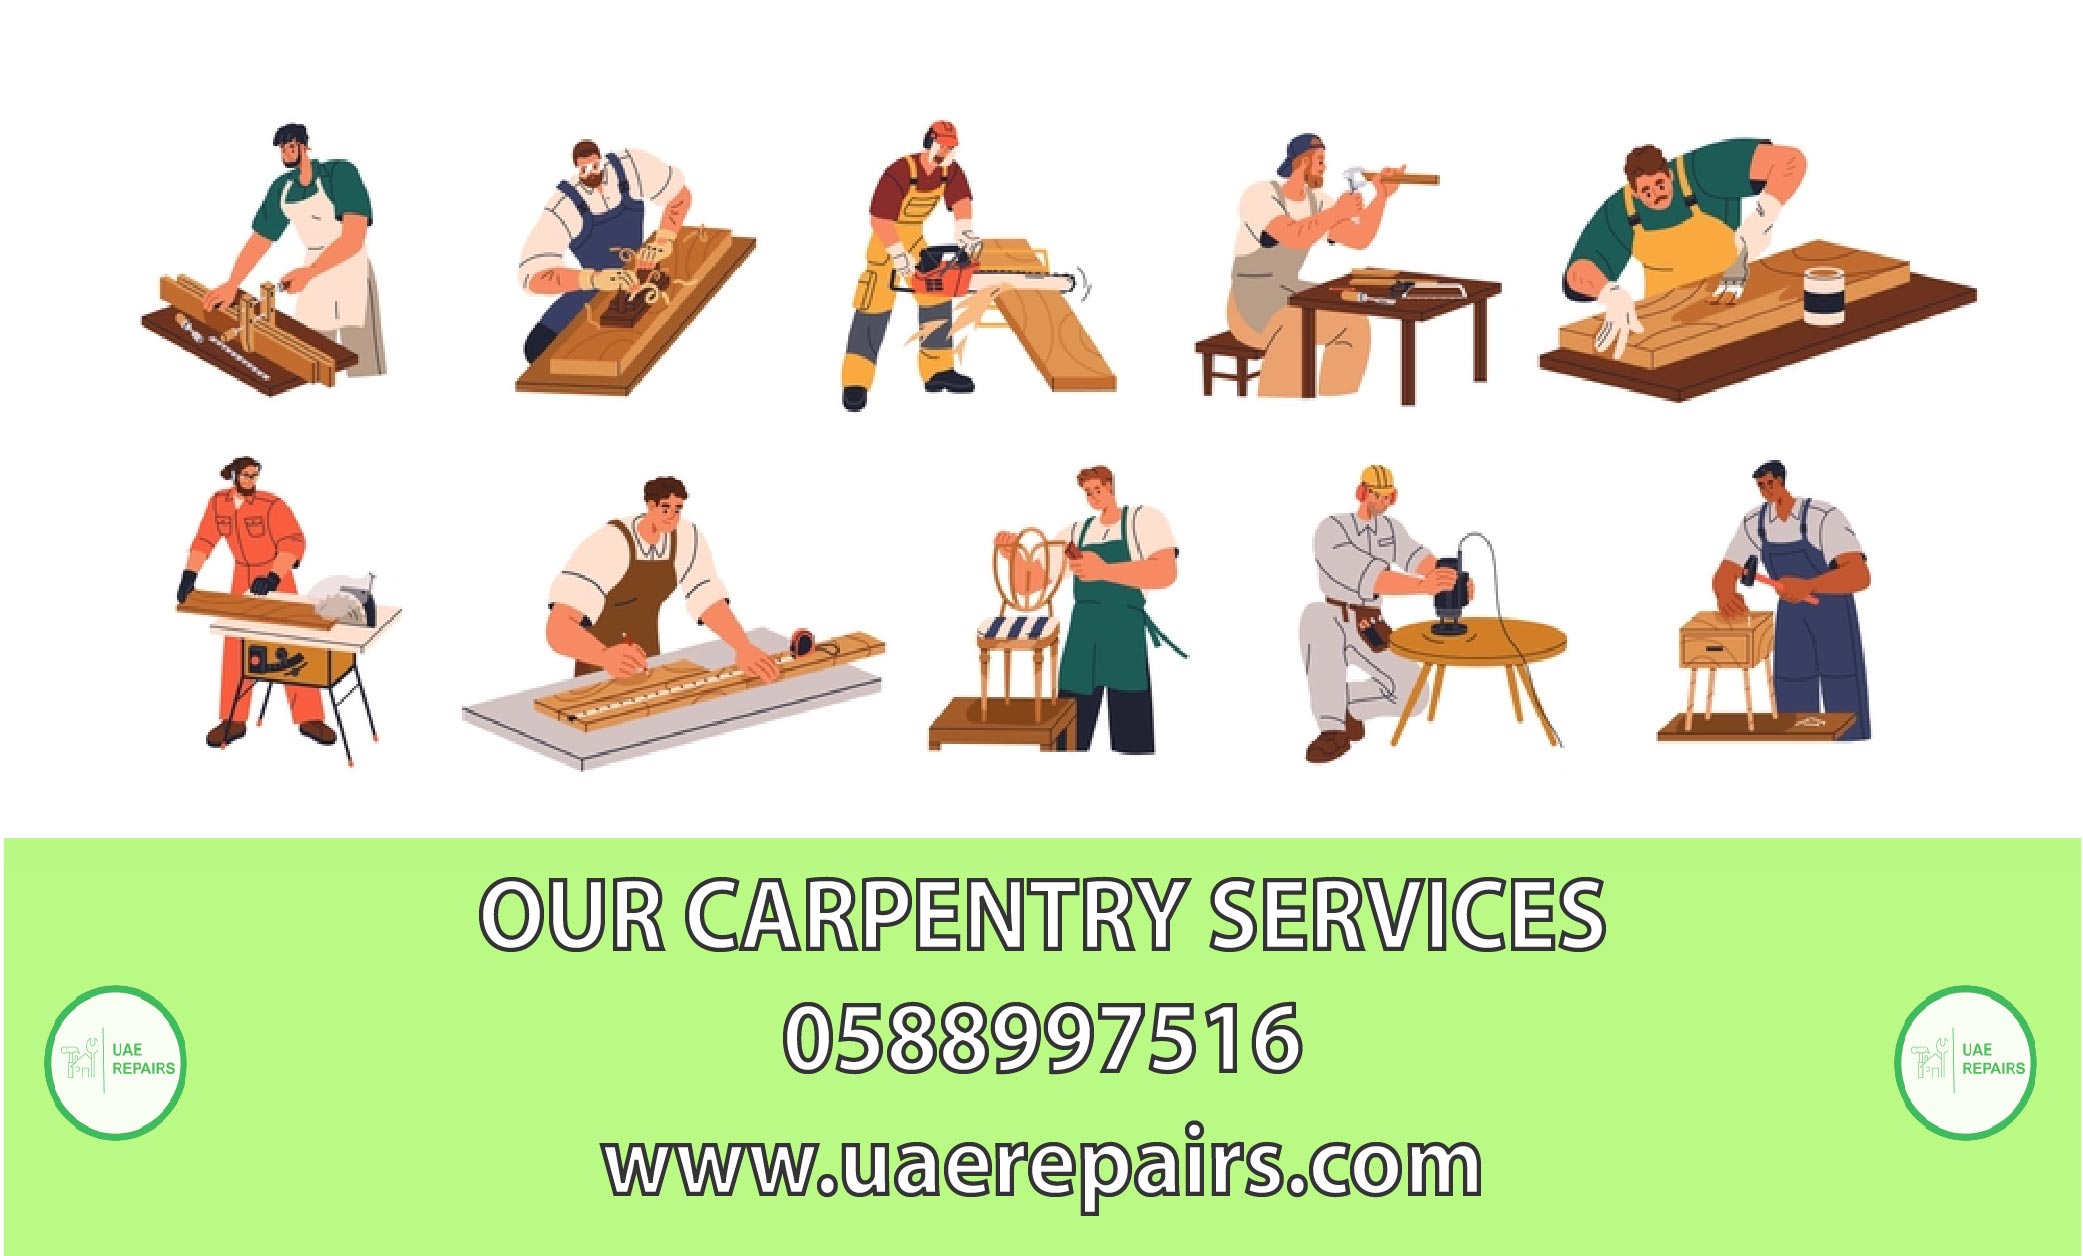 OUR CARPENTRY SERVICES IN UAE